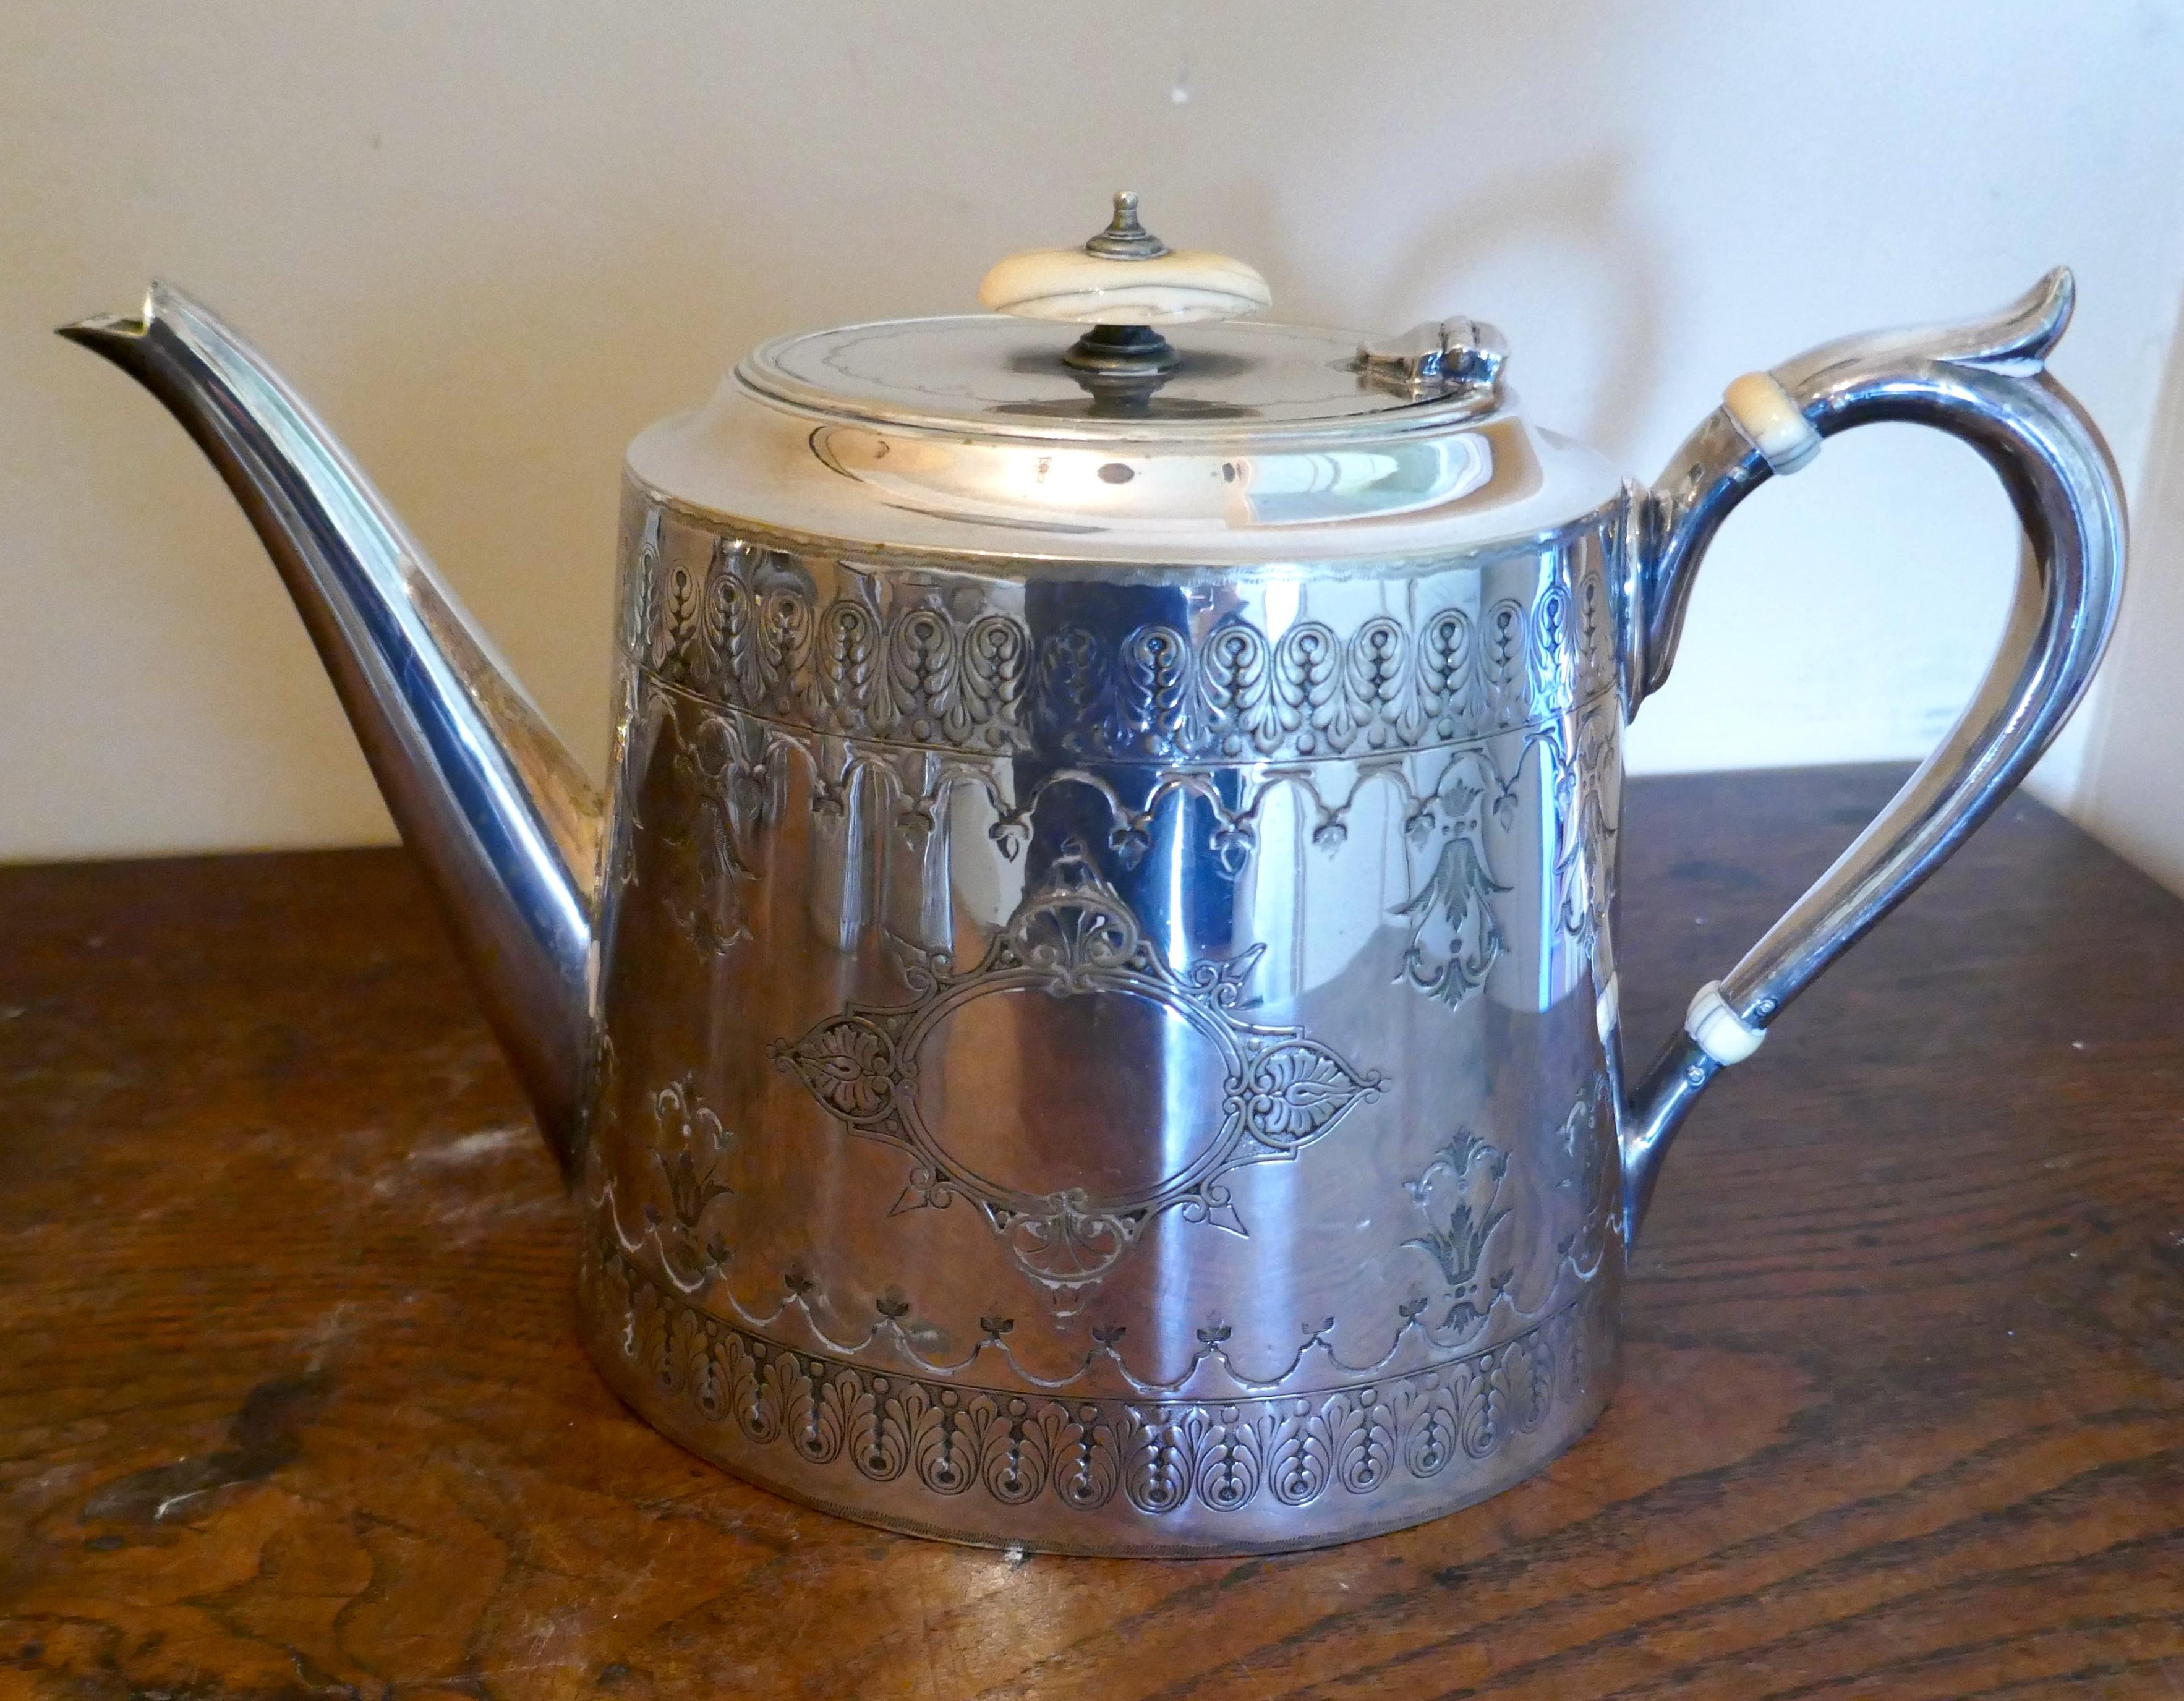 5 pieces of Victorian silver plated tea ware by John Rond and George Wish.

John Round and Sons 3-piece silver plated tea set
A very stylish three-piece tea service made from English EPNS
The set is lovely quality in an oval form, the teapot